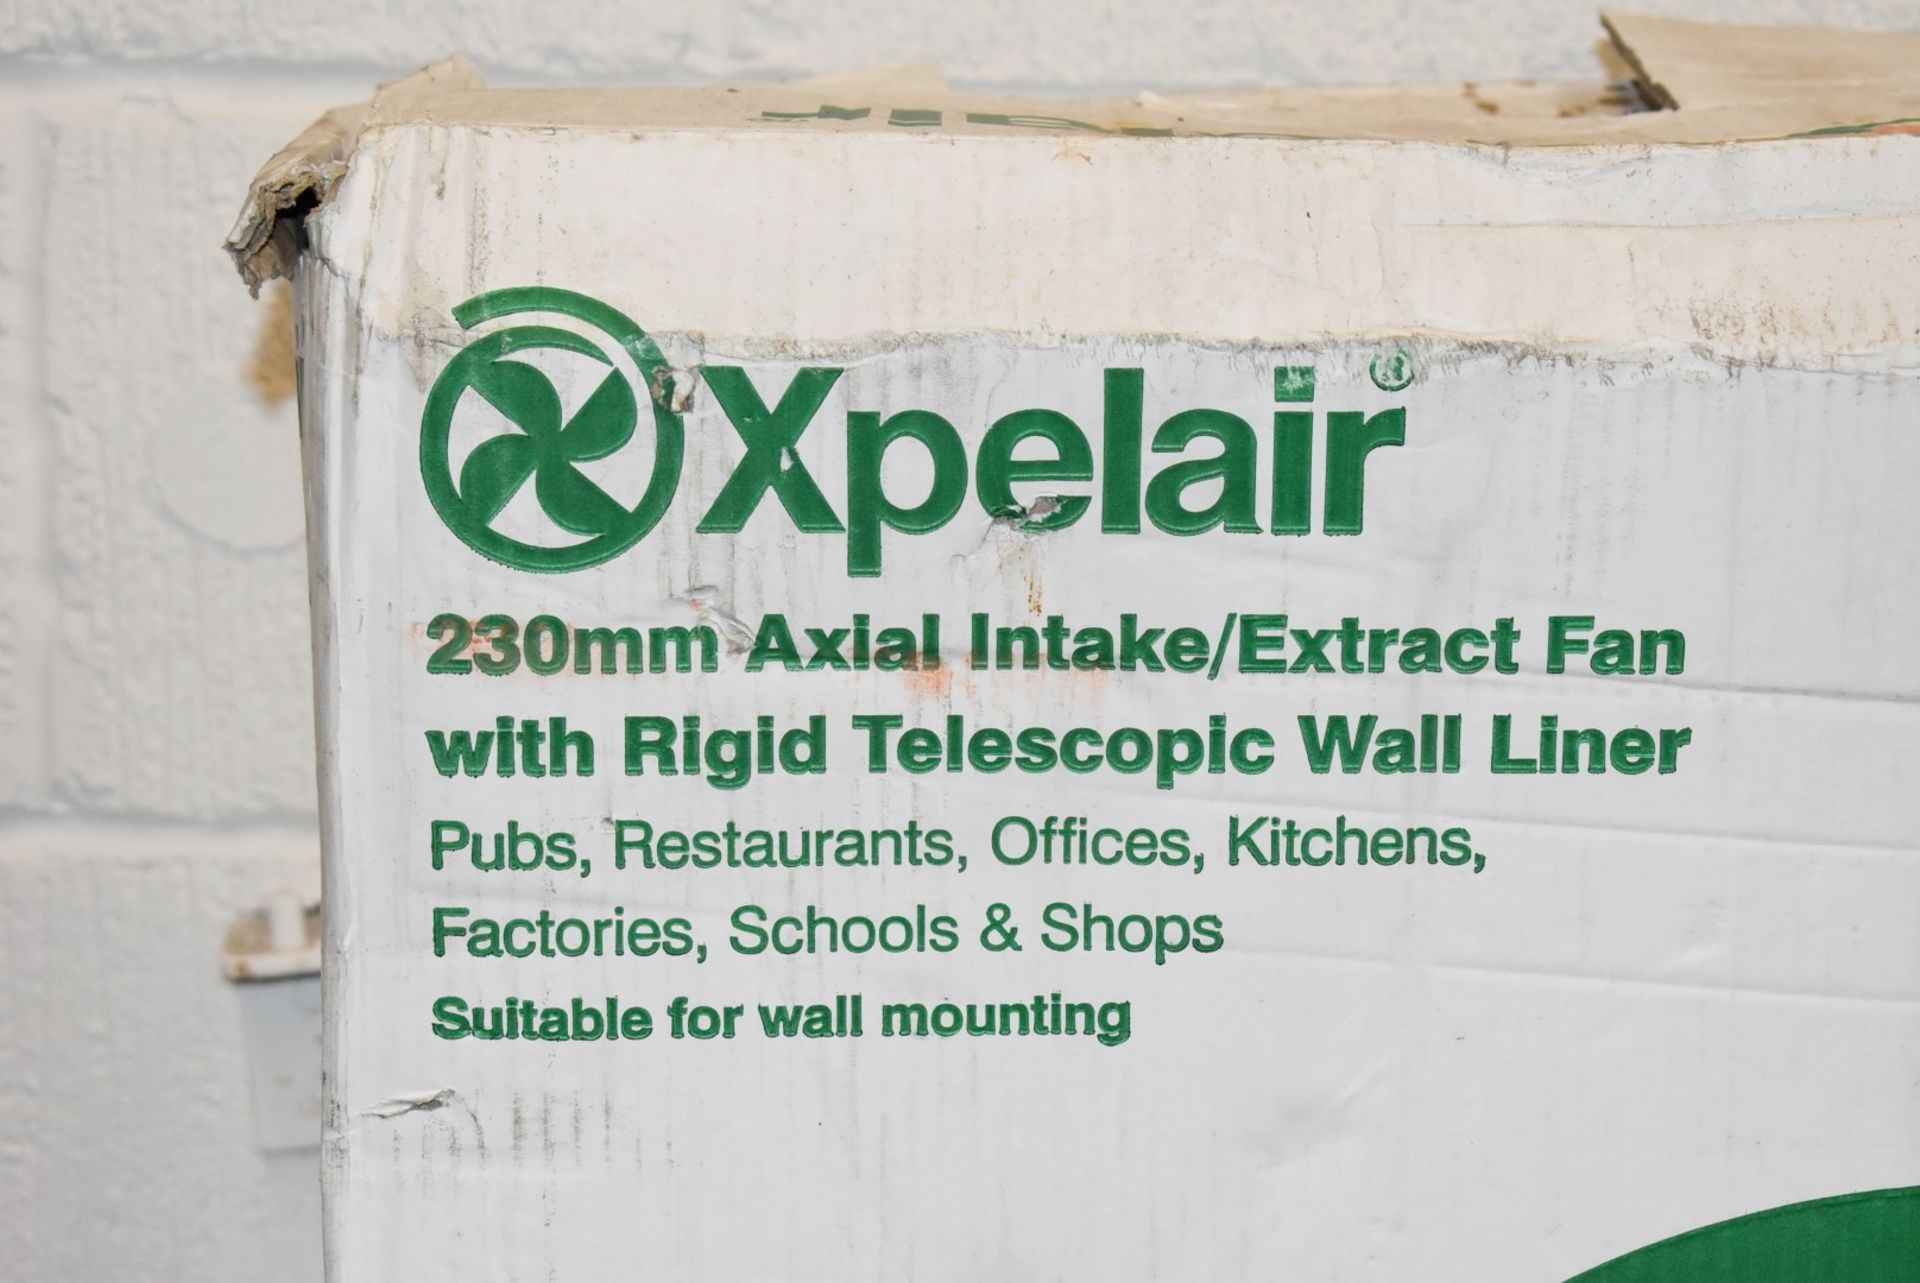 1 x Xpelair WX9 225mm Flush Commercial Wall Axial Fan With Rigid Telescopic Wall Liner - Unused With - Image 3 of 5